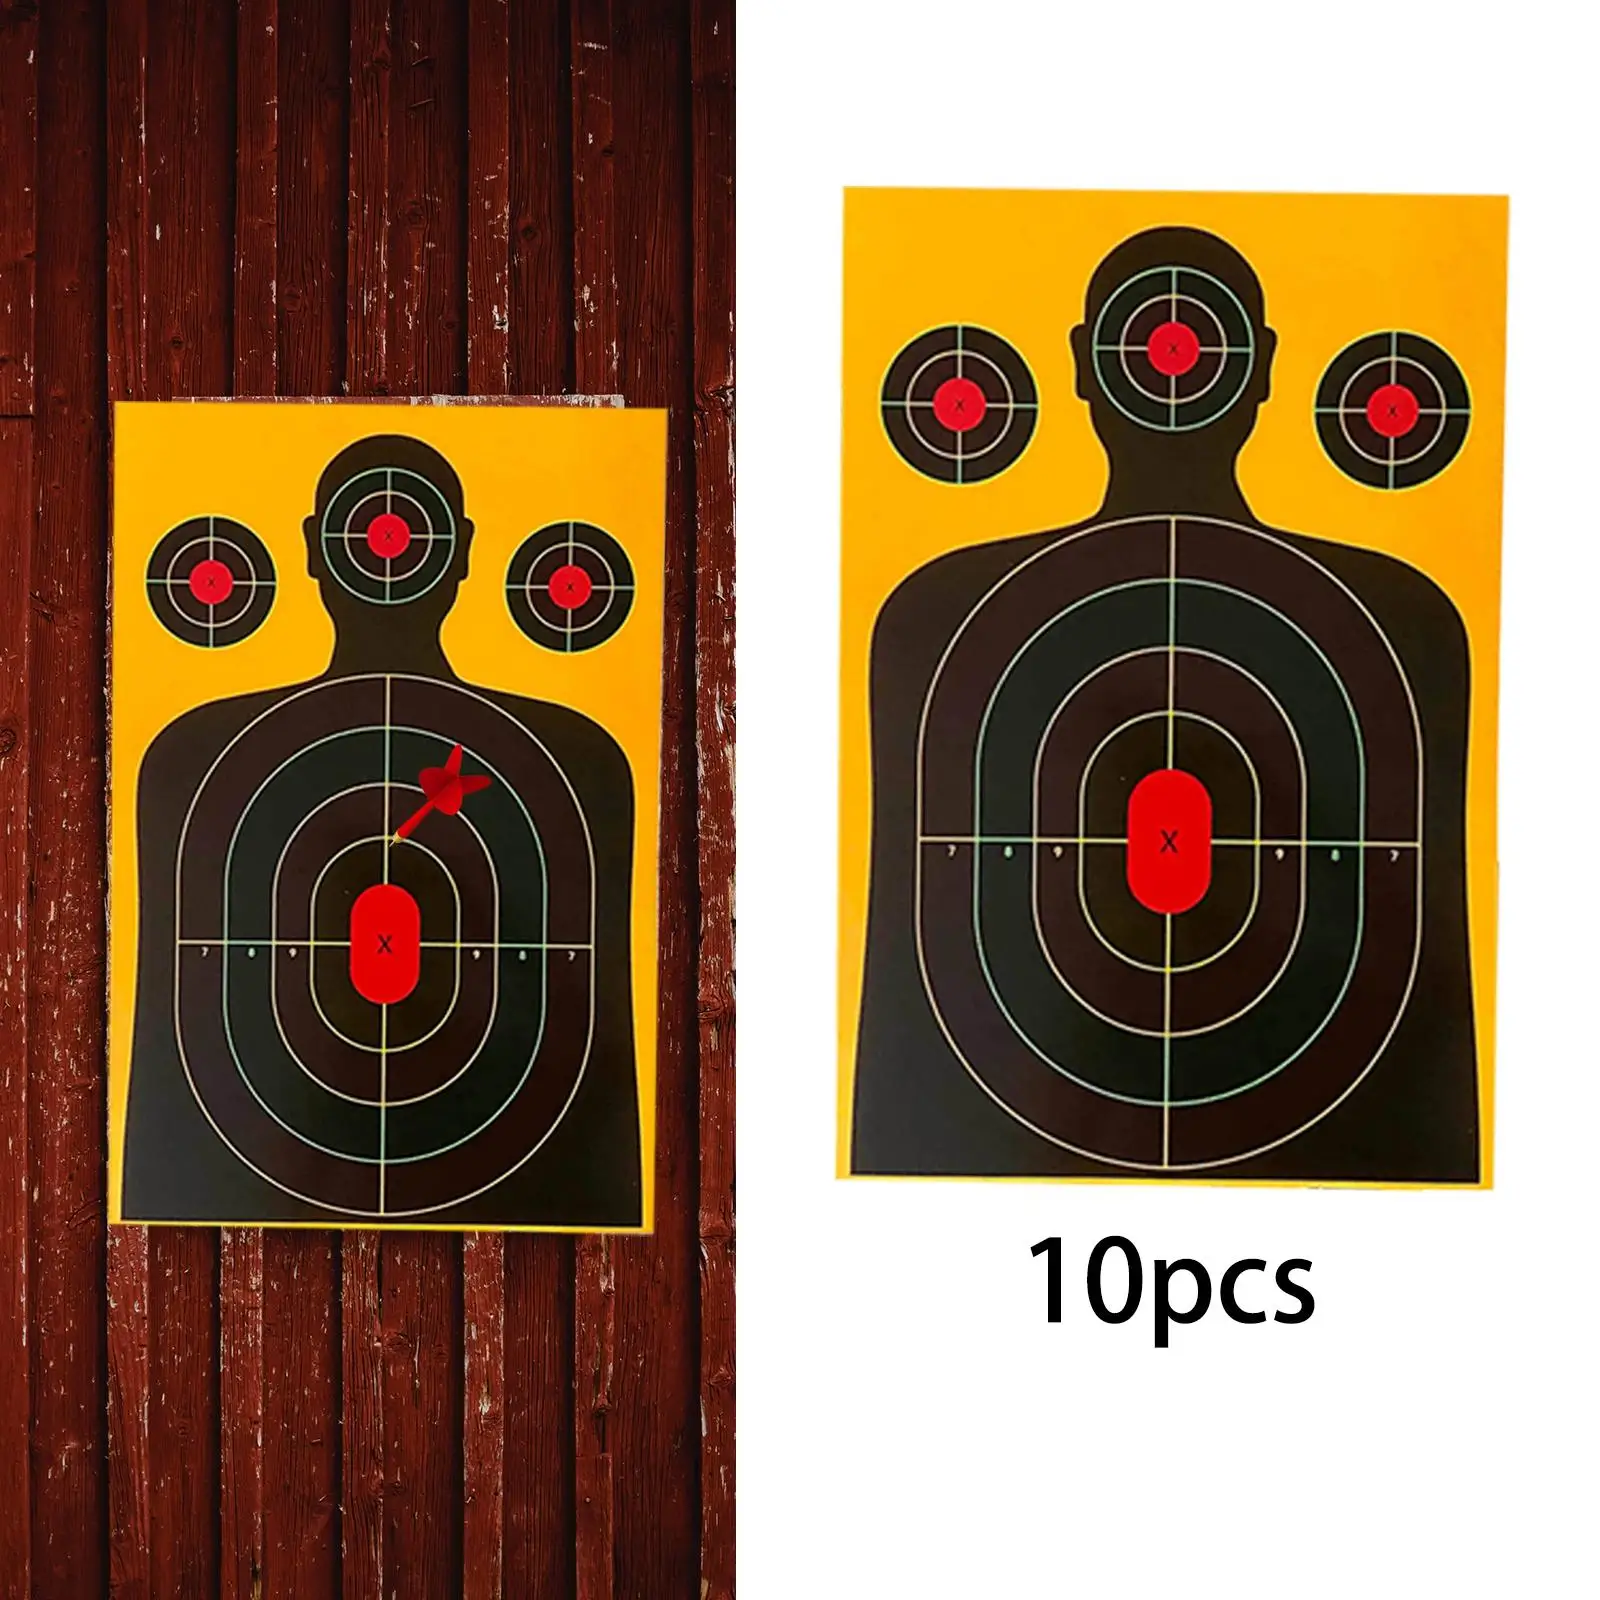 10x Silhouette Target Highly Visible Hunting Hunting Practice Hunting Training Target Target Paper Hunting Silhouette Target